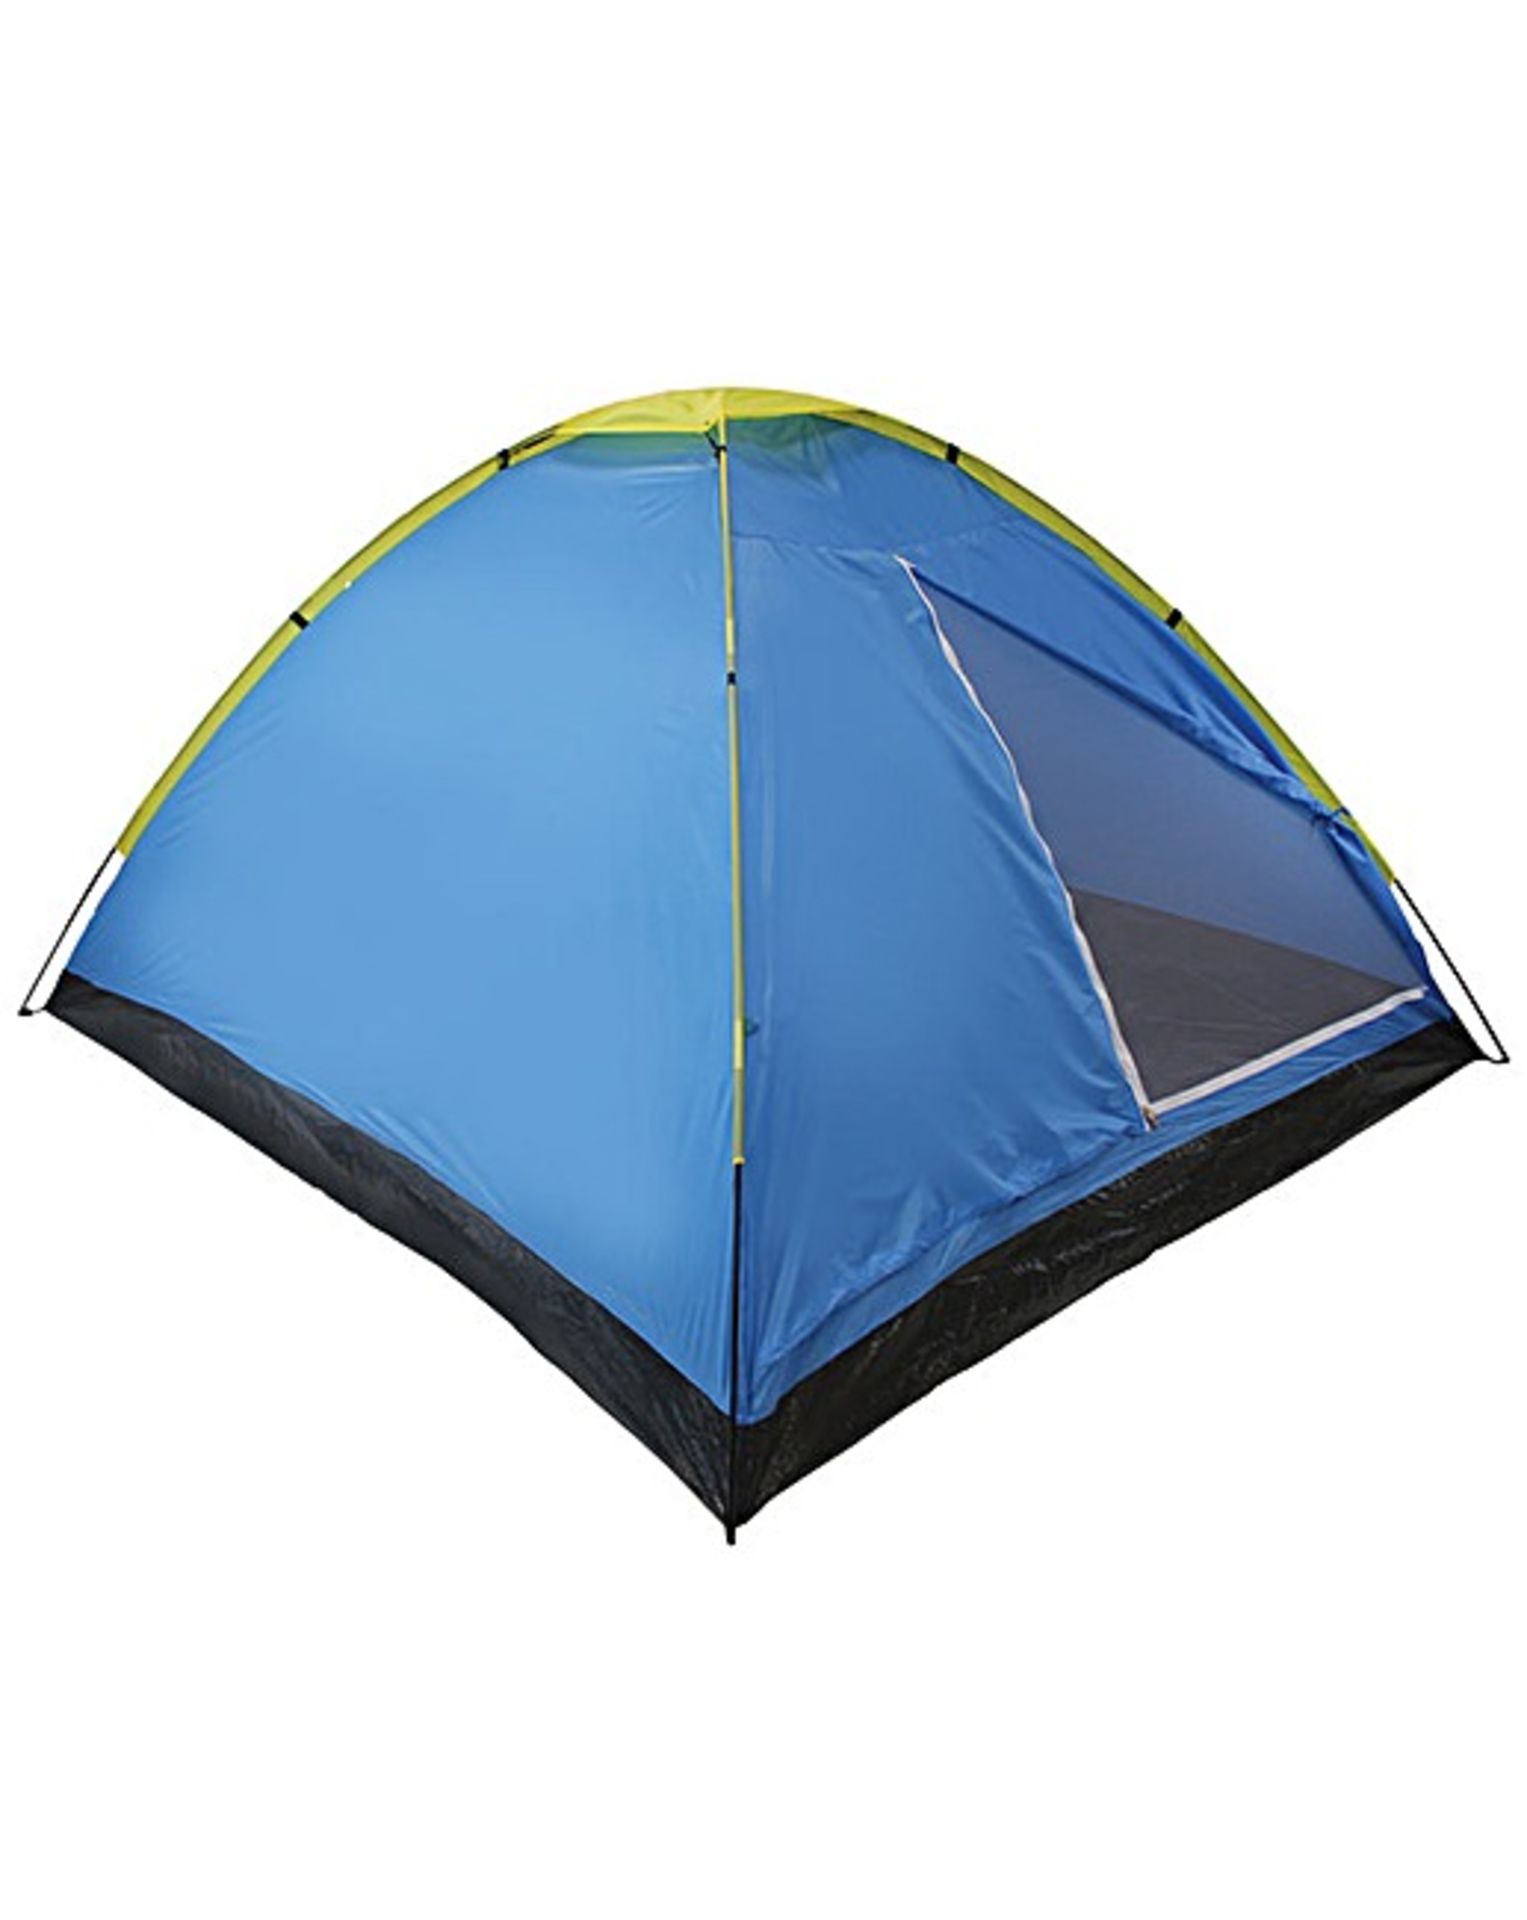 + VAT Brand New Two Person Dome Tent With Fibreglass Poles And Taped Seams RRP21.00 (JD Williams)